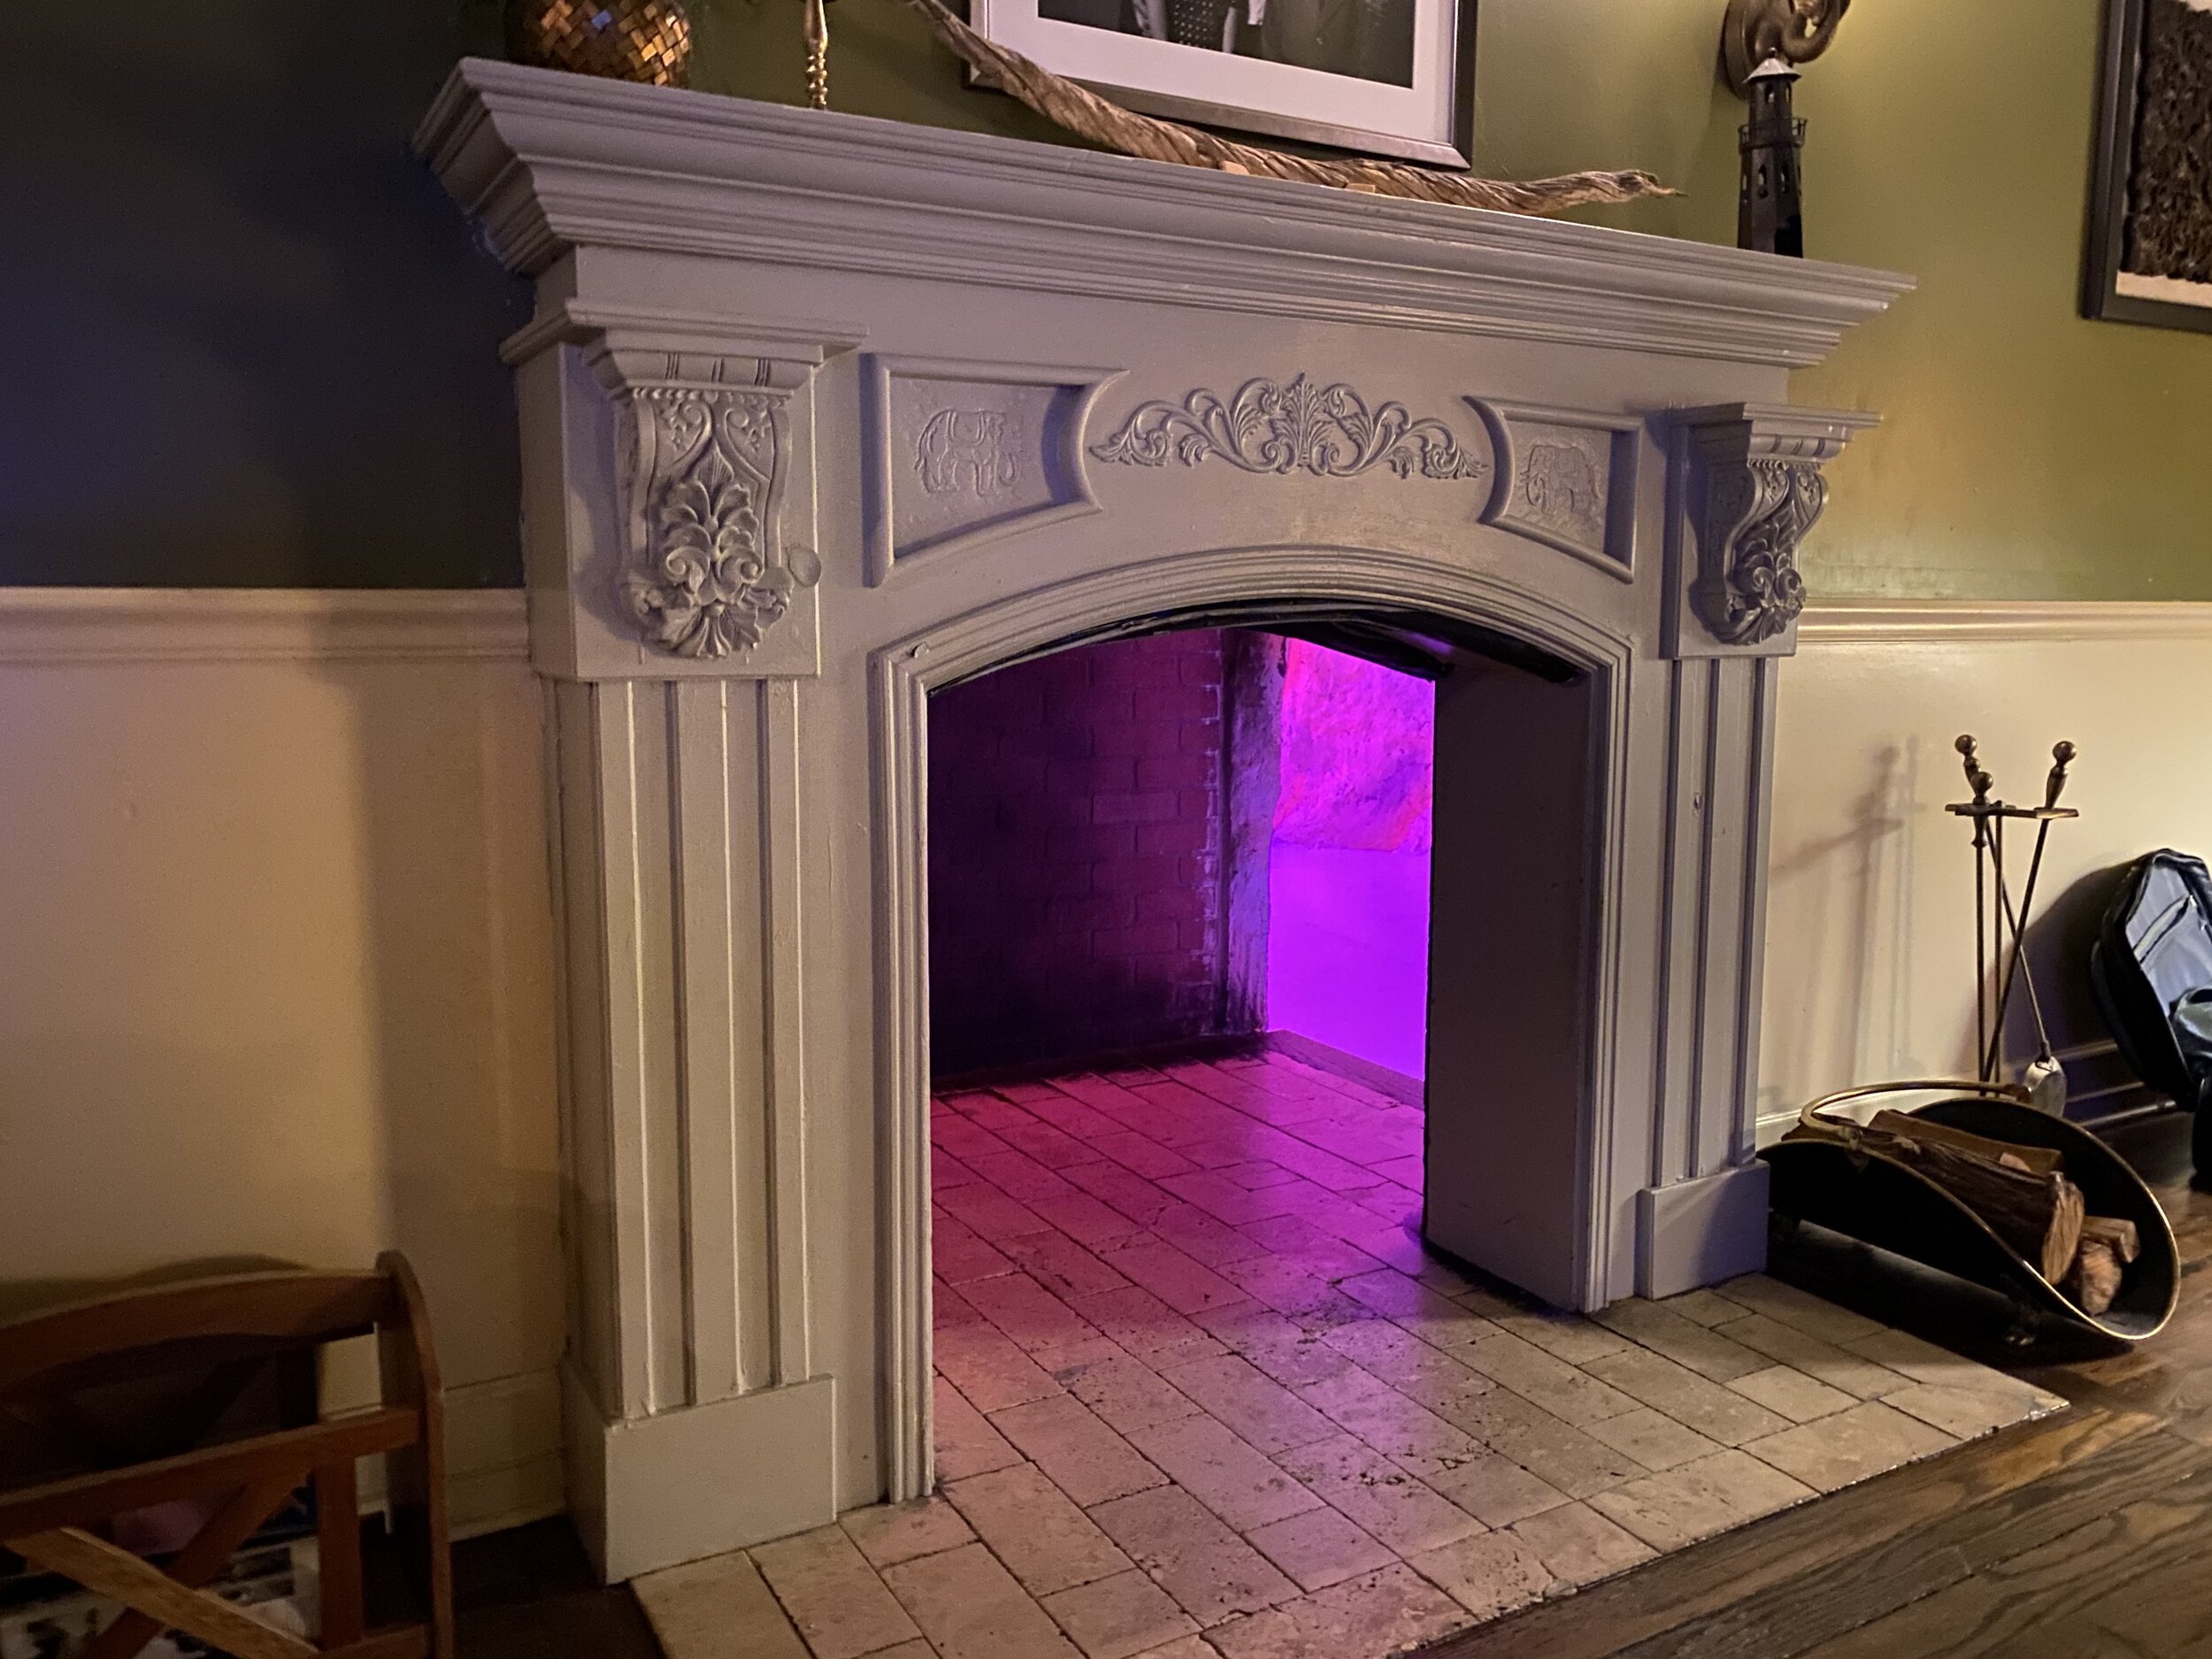 Fireplace with purple light shining out of it